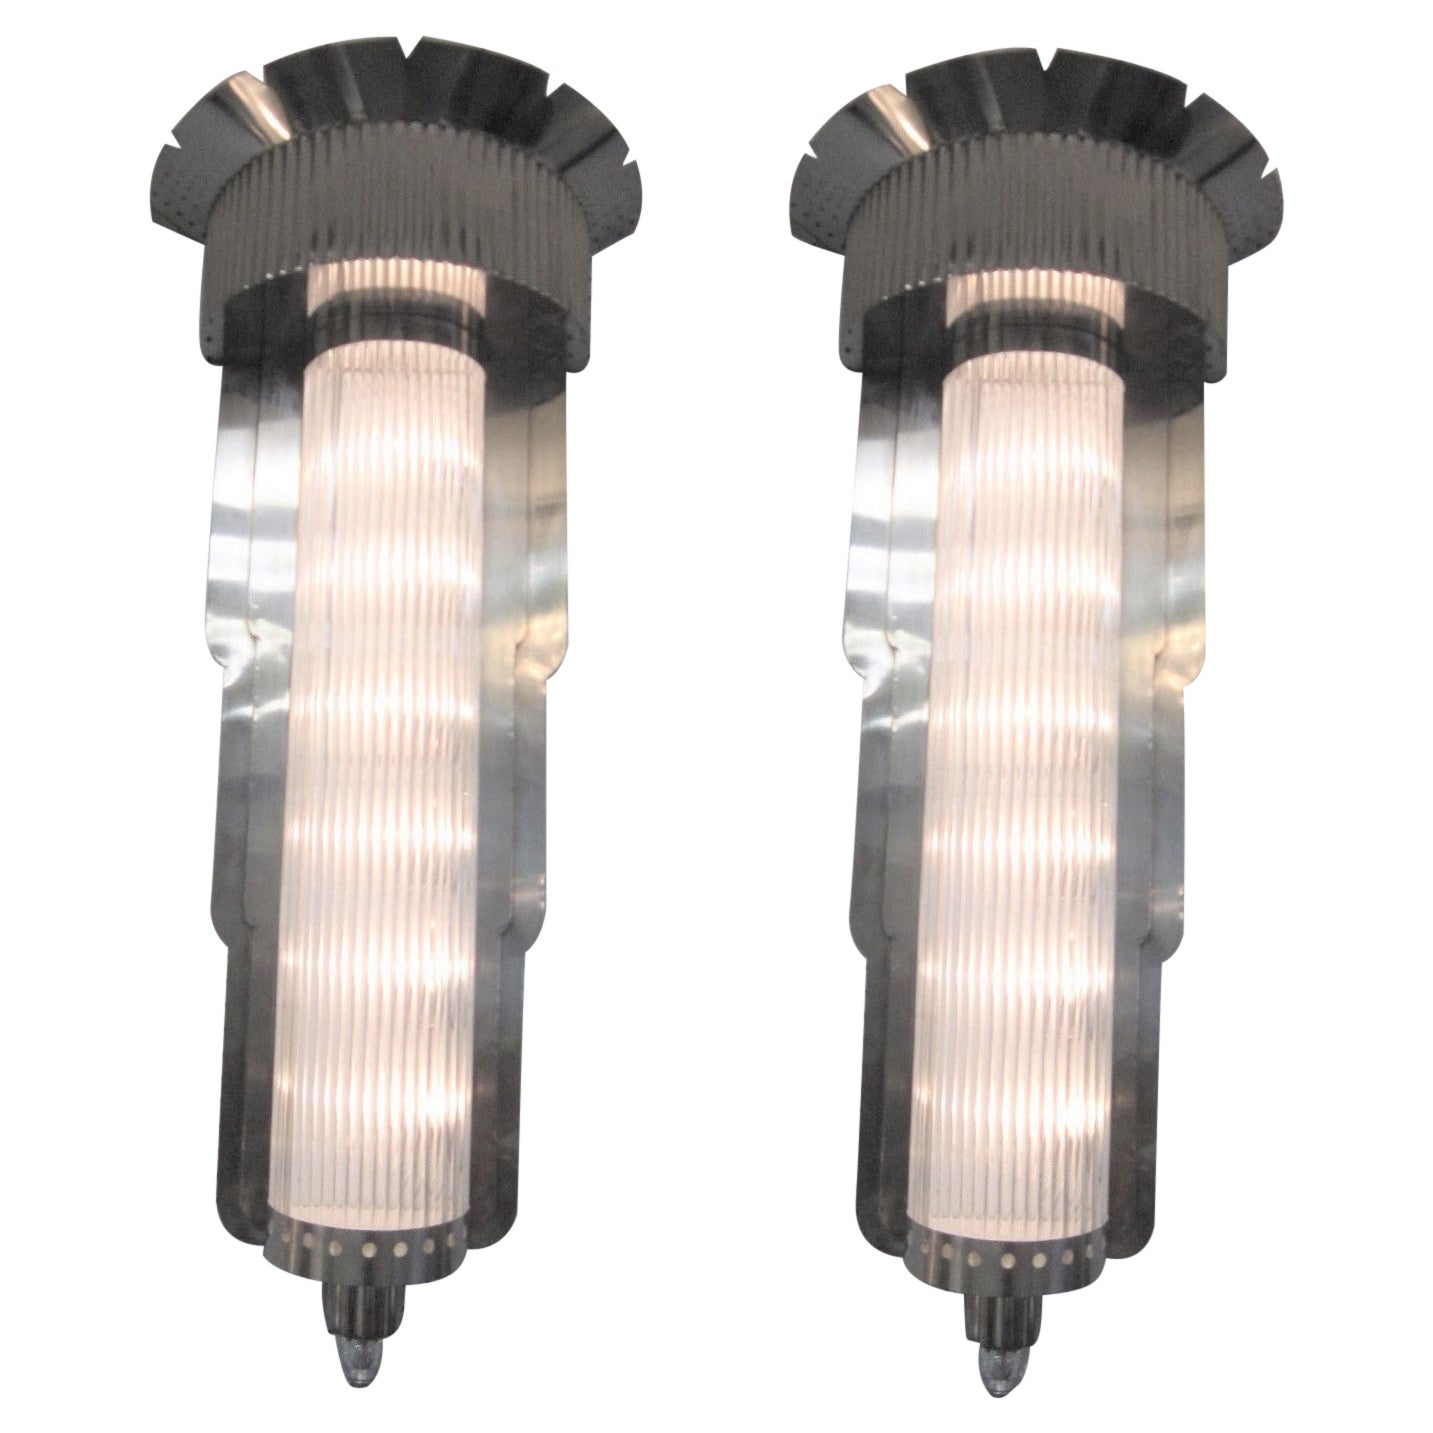 Pair of Monumental Art Deco Glass and Nickel Wall Sconces